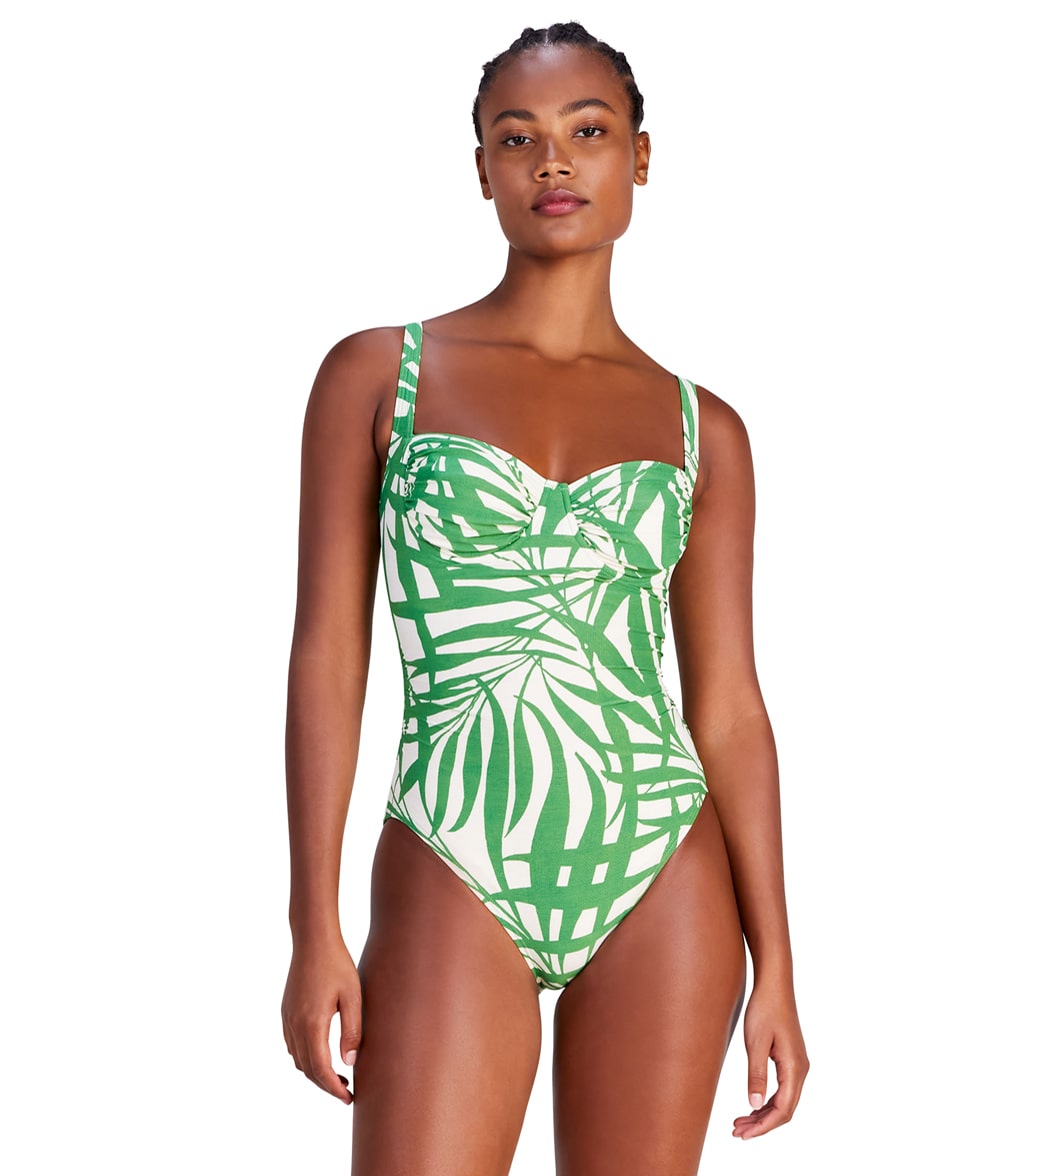 Kate Spade New York Womens Palm Fronds Underwire One Piece Swimsuit at SwimOutlet